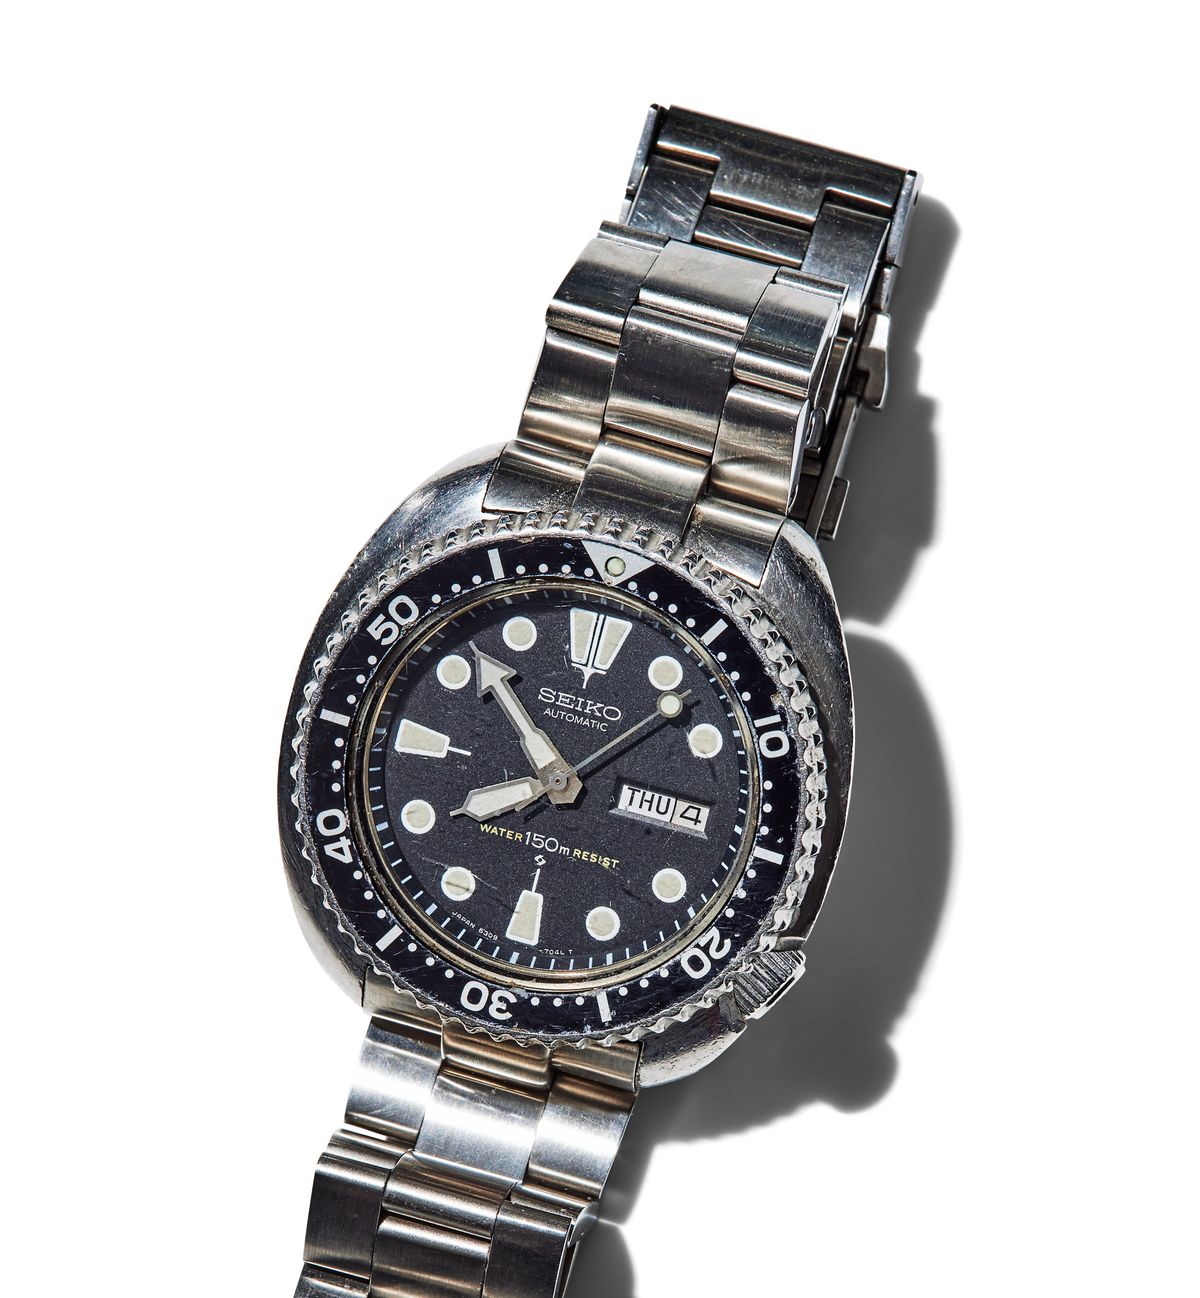 This Seiko Diver Isn't Just a Watch. It's Reminder.